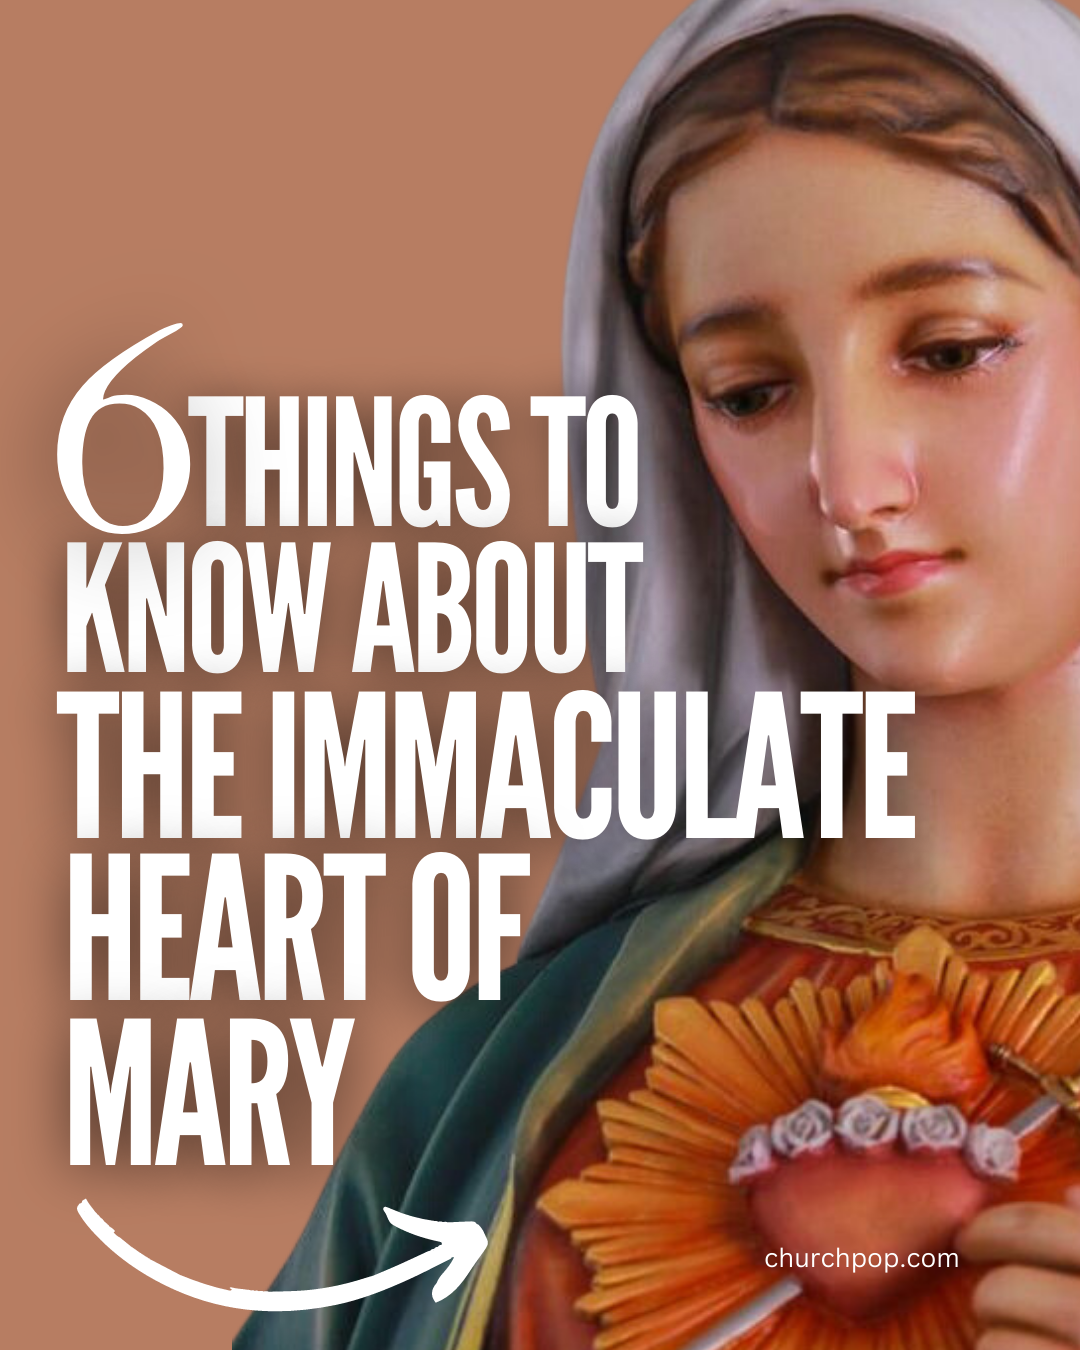 How the Heart of Mary leads directly to the Heart of Jesus